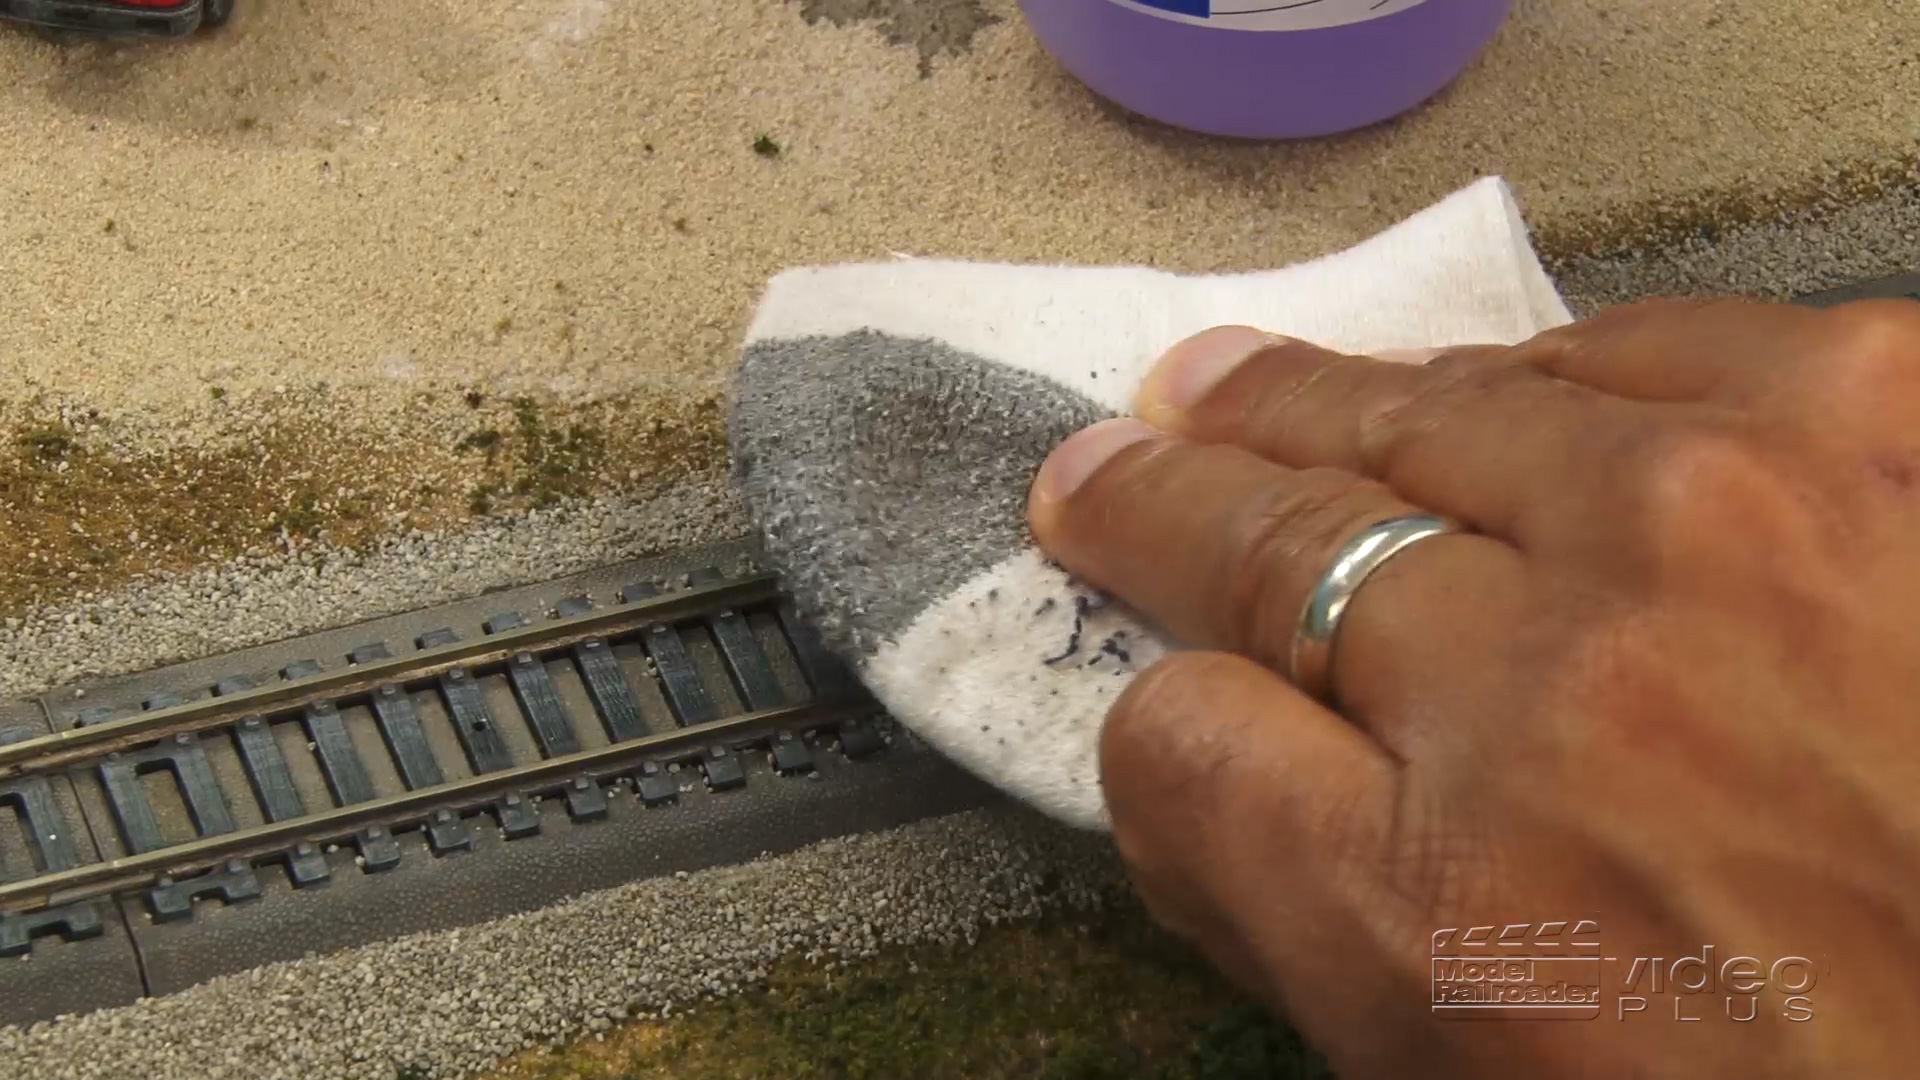 How to clean model train track